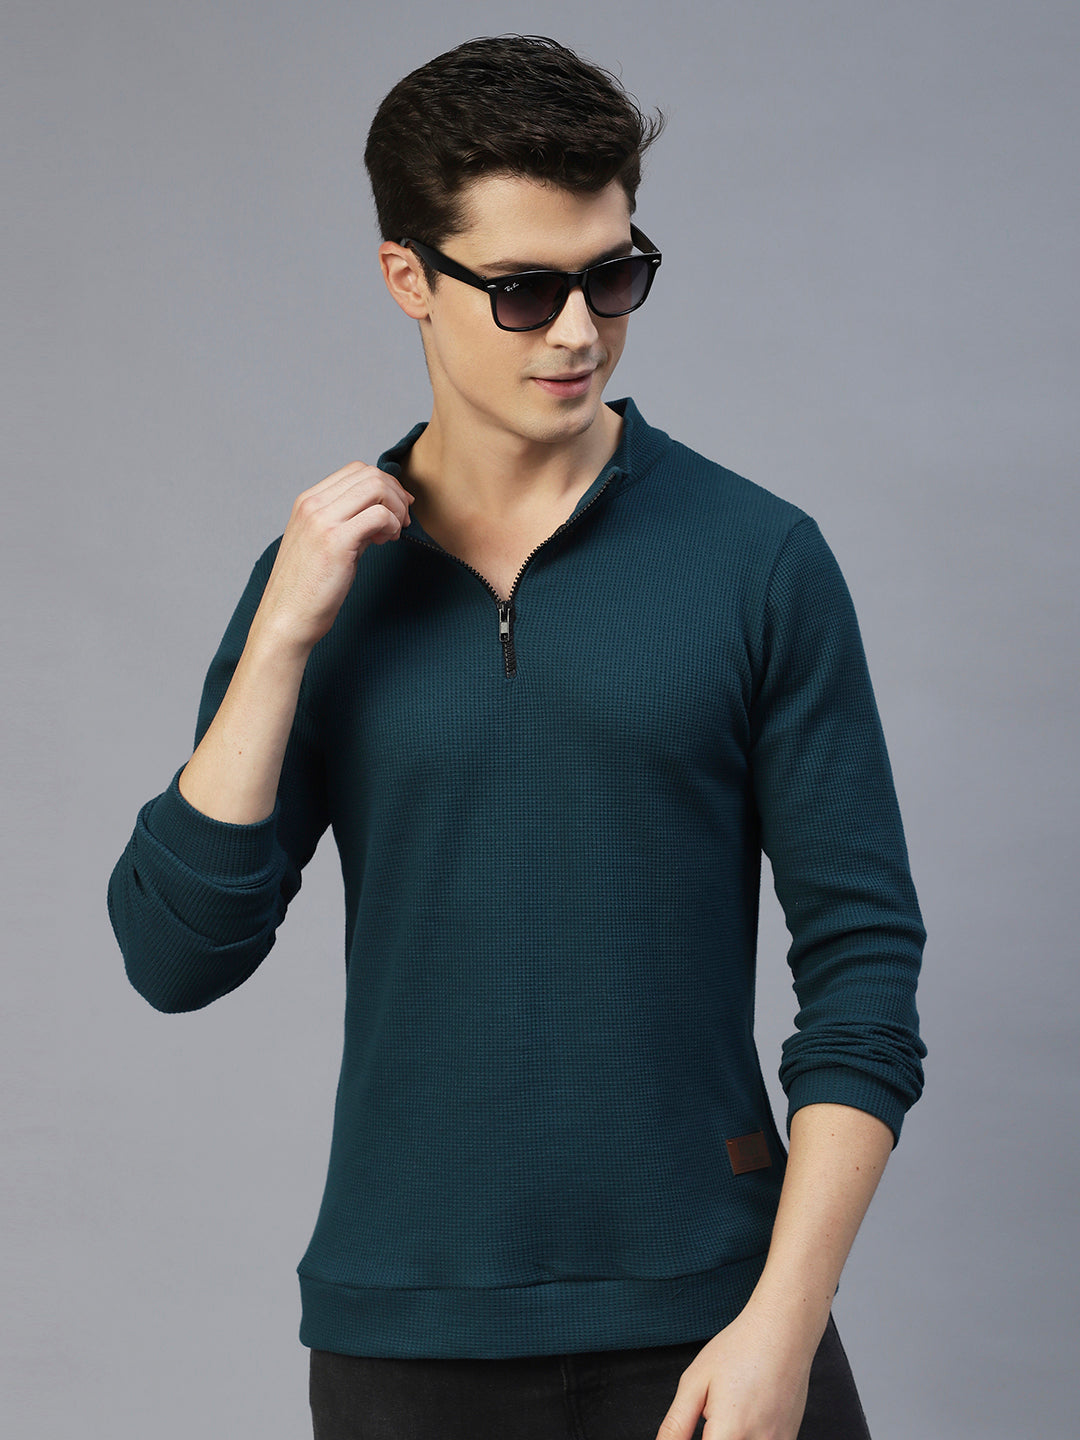 Shop the GO KNIT Waffle Henley